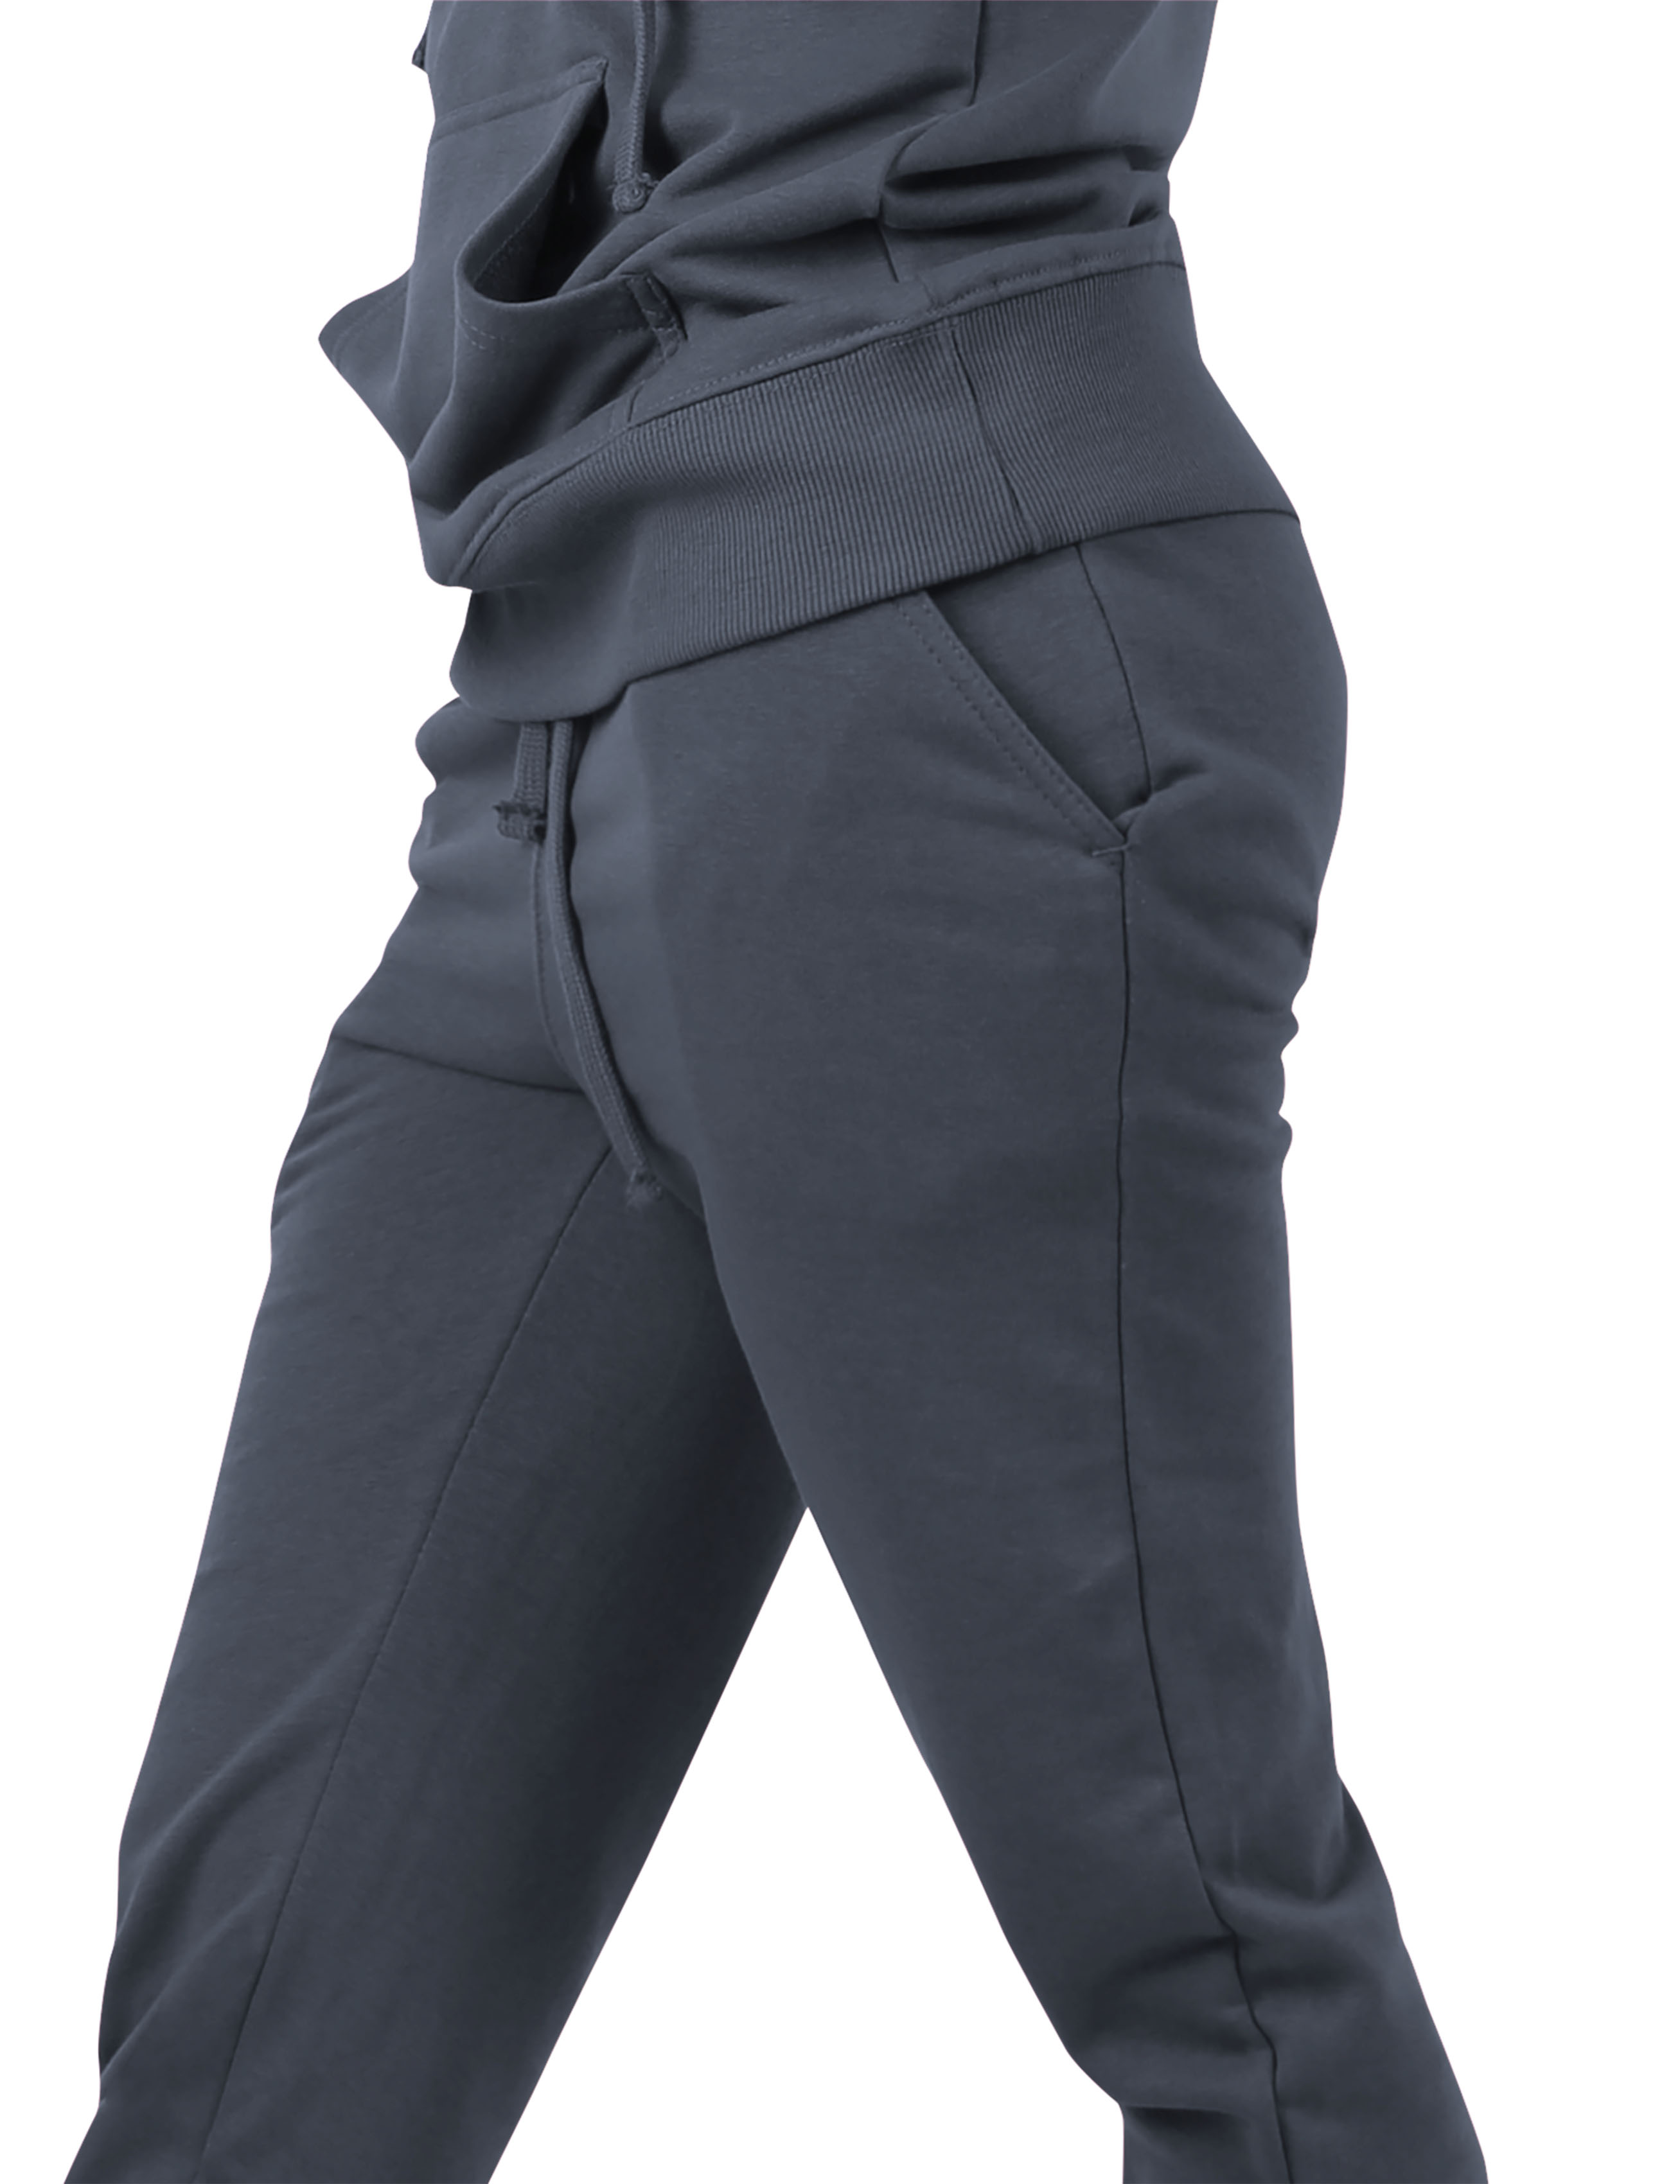 Ma Croix Womens Premium French Terry Joggers Wrinkle Resistant Sweatpants - image 3 of 6